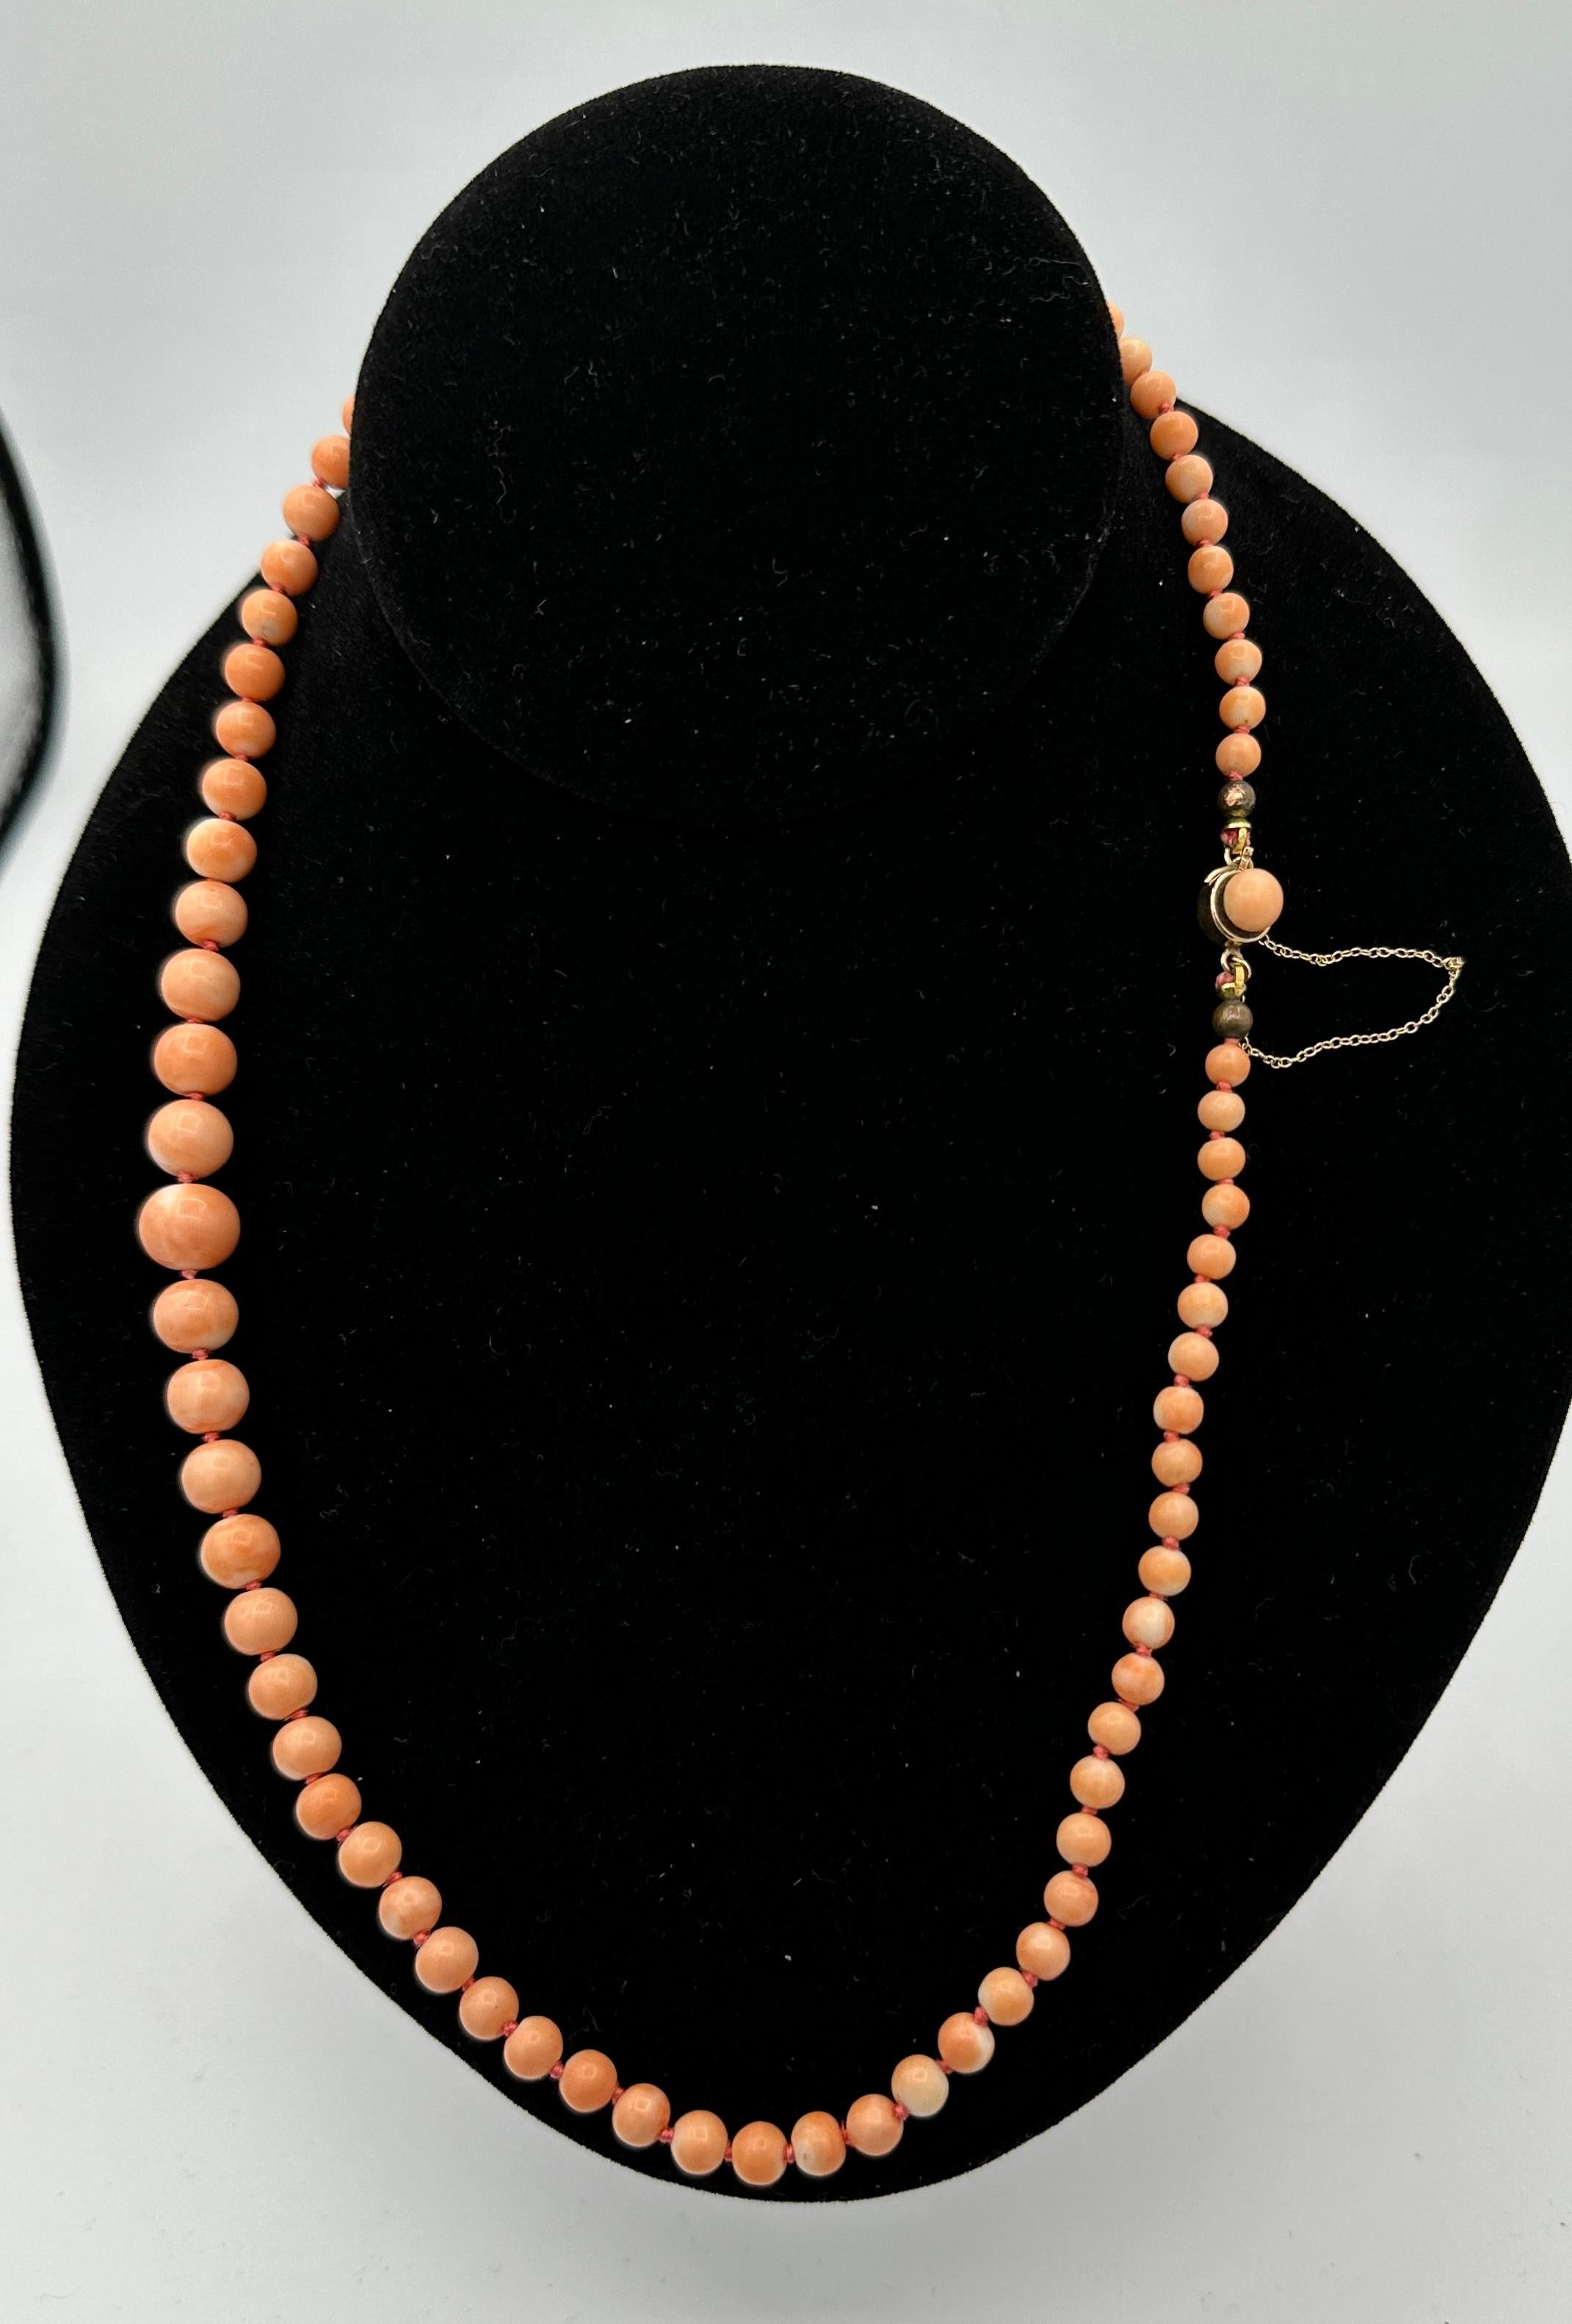 Victorian Coral Gold Necklace 20 Inches Graduated Coral Beads 5 - 10mm For Sale 2